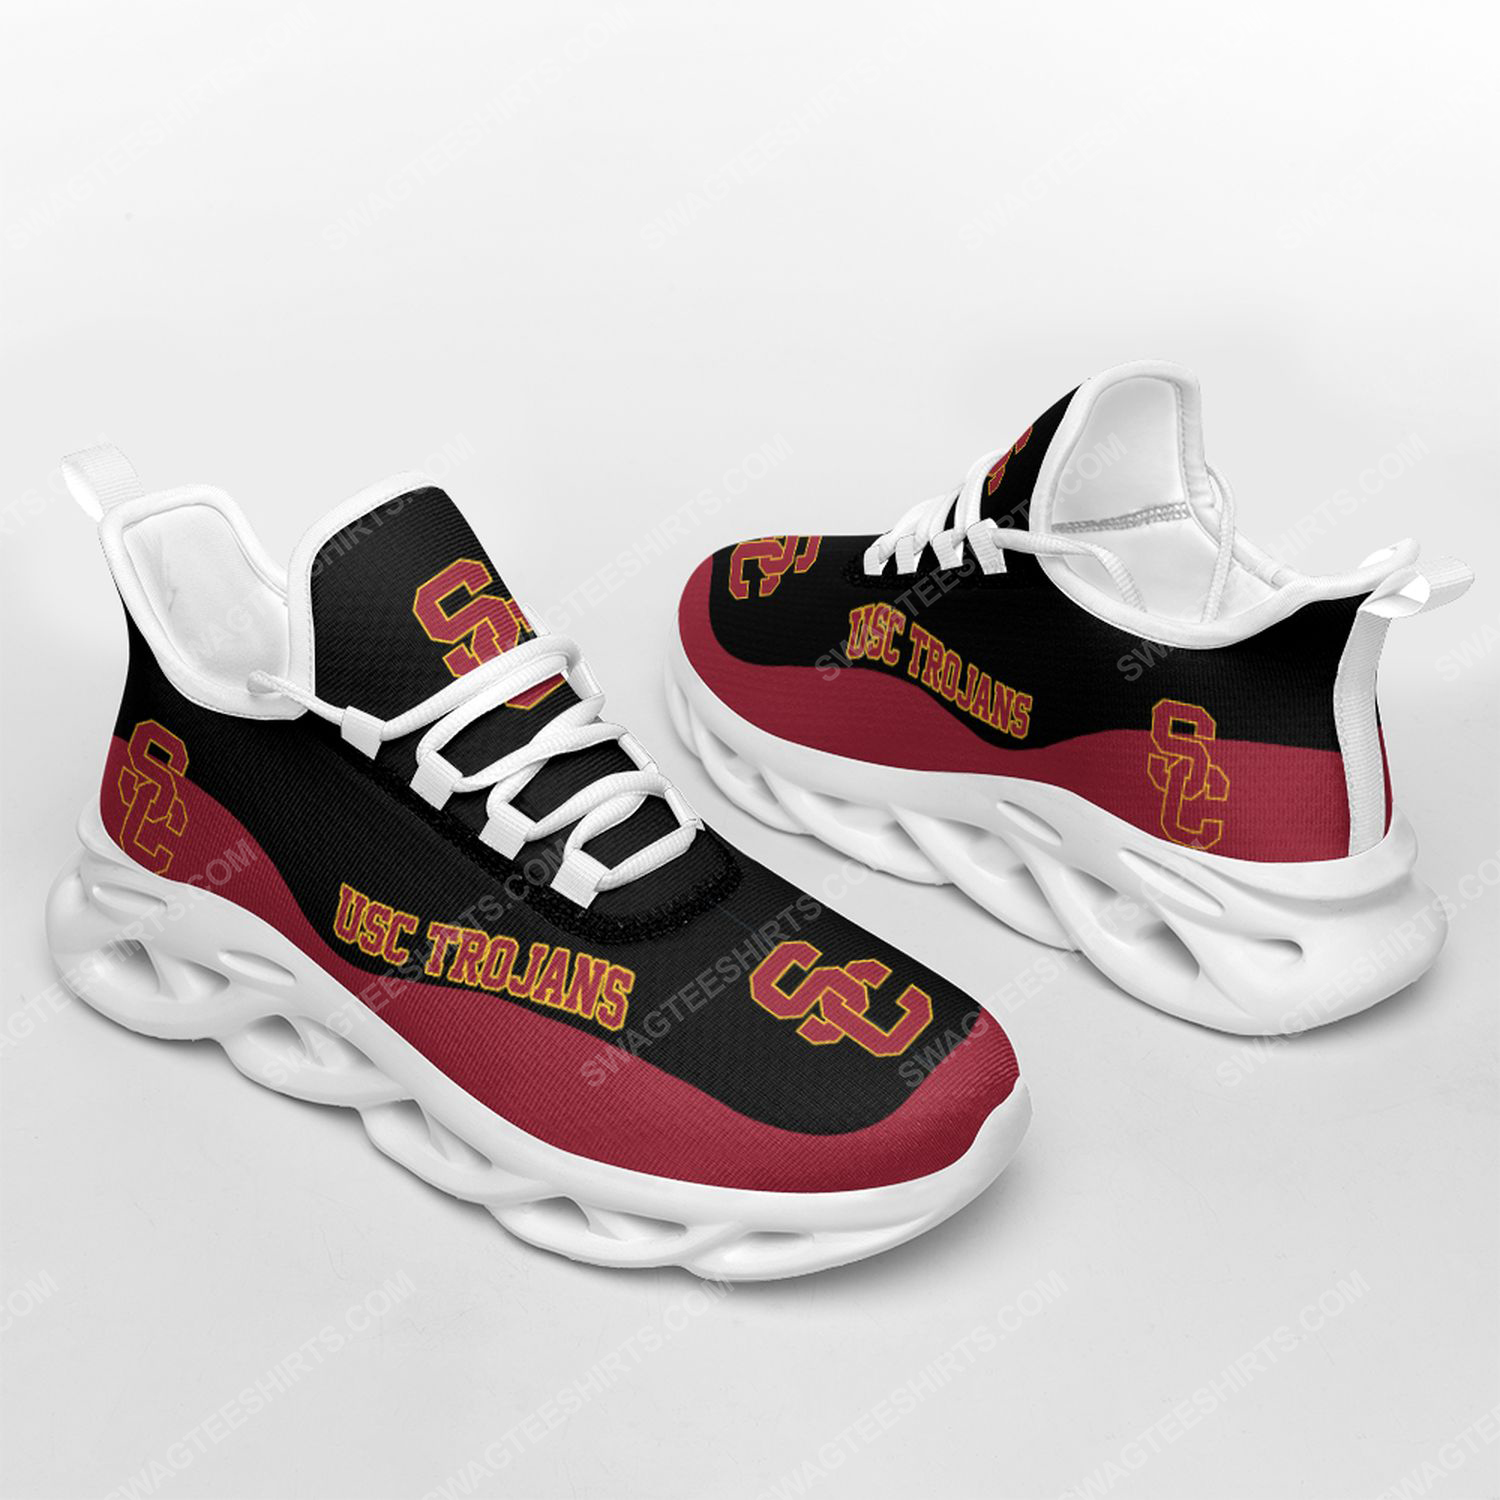 [special edition] The usc trojans football team max soul shoes – Maria